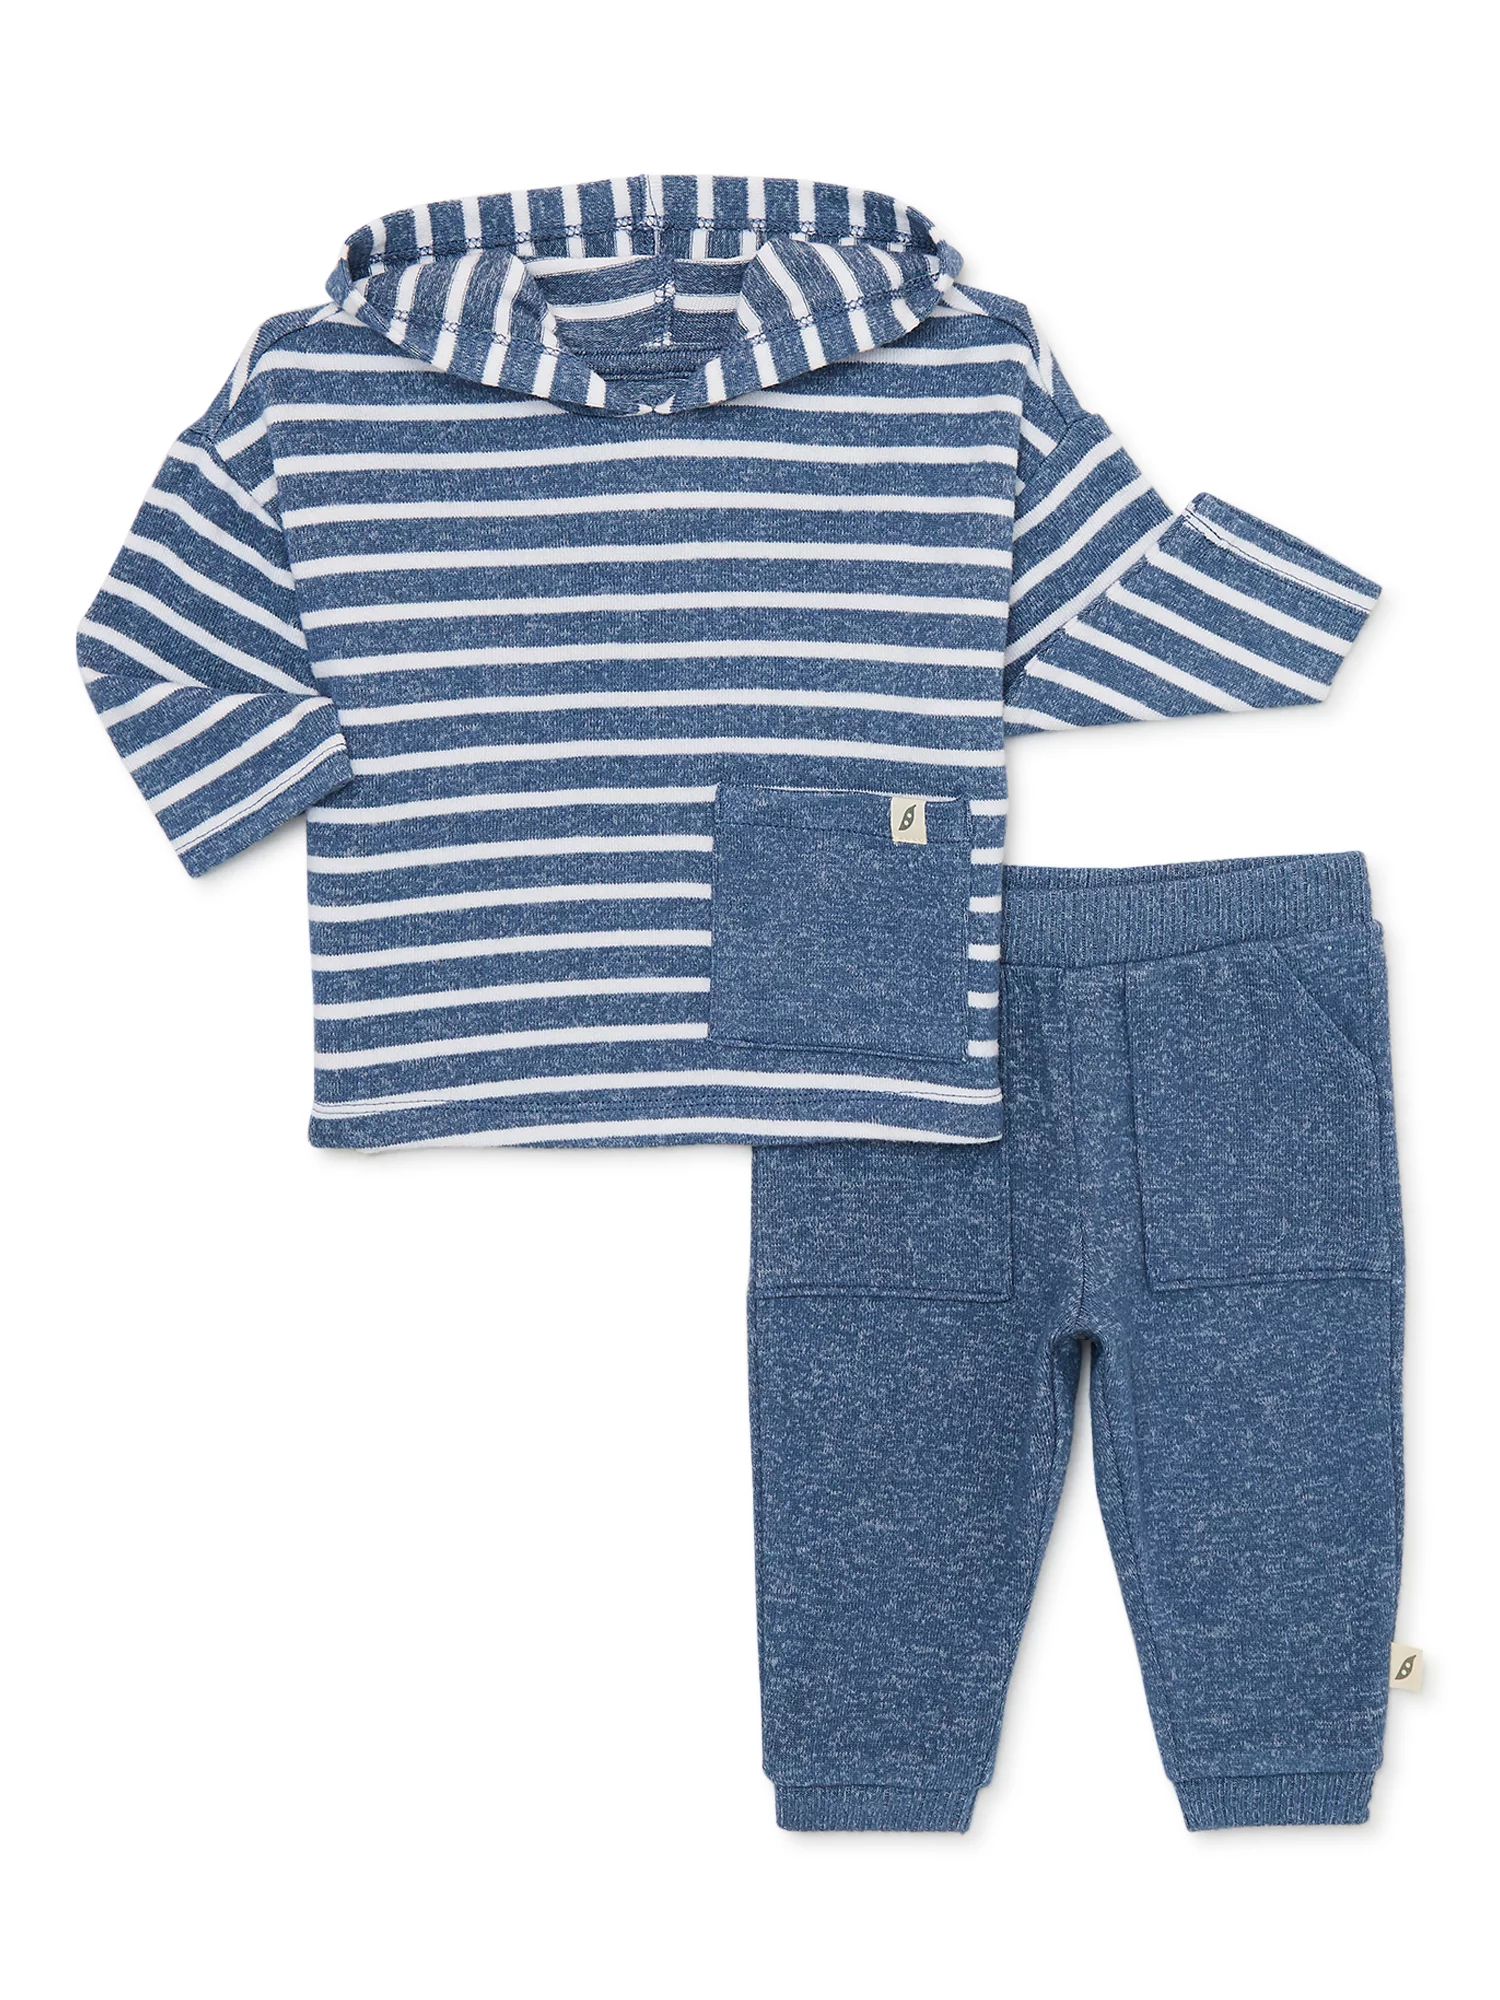 easy-peasy Baby Hoodie and Jogger Pants Outfit Set, 2-Piece, Sizes 0/3-24 Months | Walmart (US)